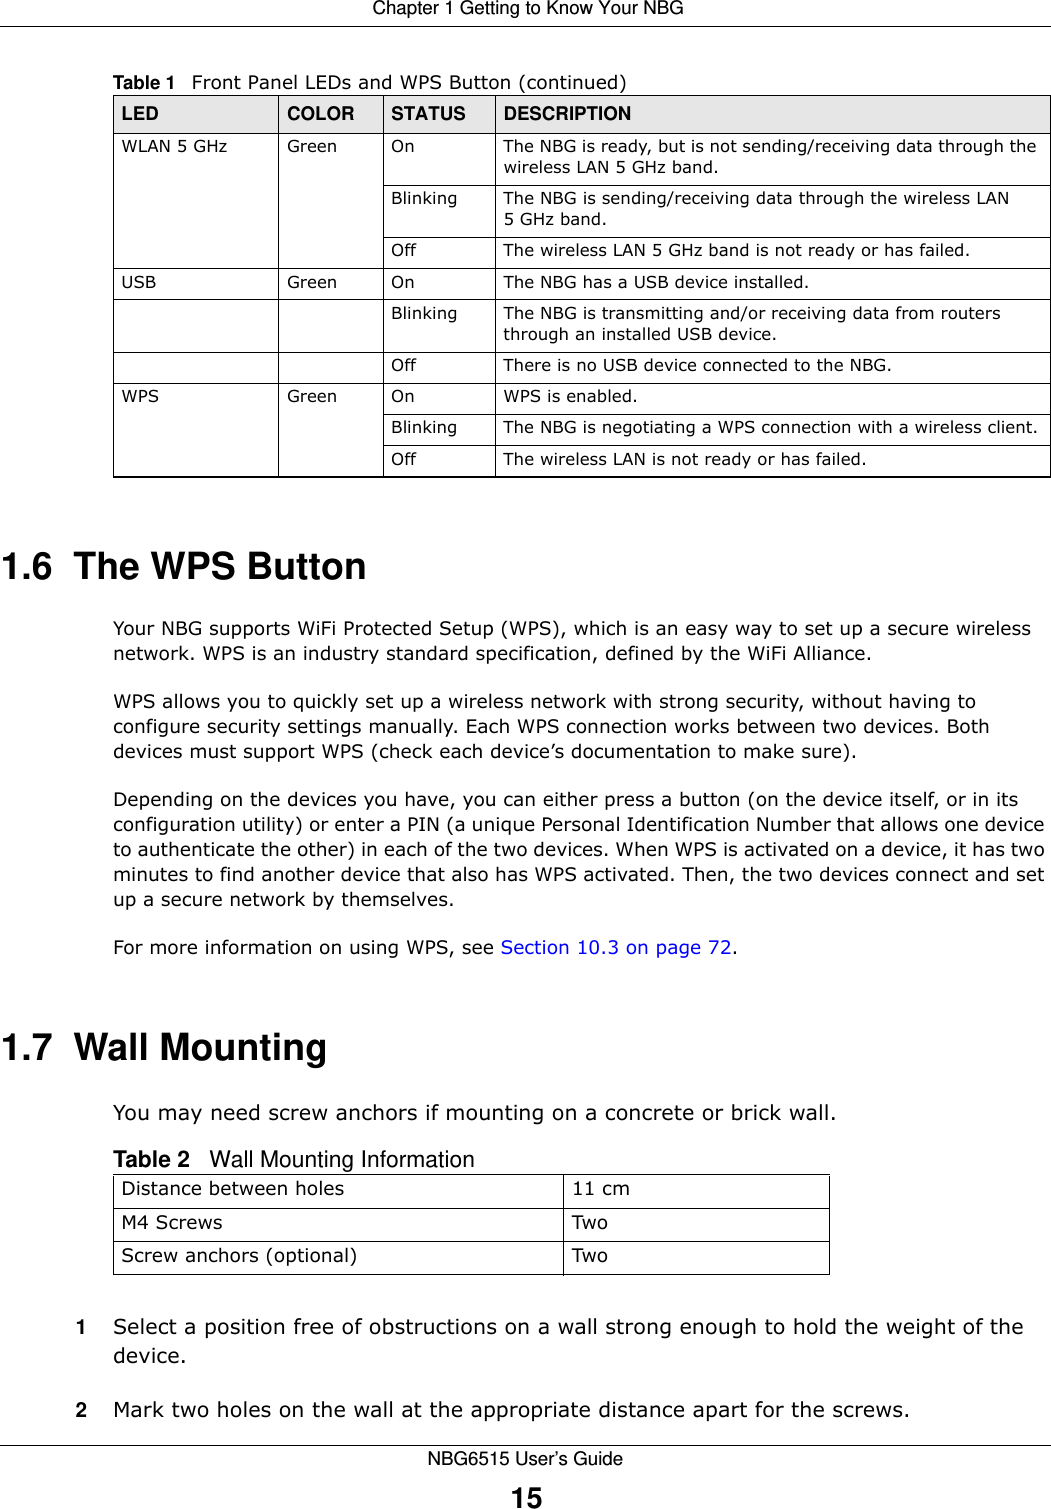  Chapter 1 Getting to Know Your NBGNBG6515 User’s Guide151.6  The WPS ButtonYour NBG supports WiFi Protected Setup (WPS), which is an easy way to set up a secure wireless network. WPS is an industry standard specification, defined by the WiFi Alliance.WPS allows you to quickly set up a wireless network with strong security, without having to configure security settings manually. Each WPS connection works between two devices. Both devices must support WPS (check each device’s documentation to make sure). Depending on the devices you have, you can either press a button (on the device itself, or in its configuration utility) or enter a PIN (a unique Personal Identification Number that allows one device to authenticate the other) in each of the two devices. When WPS is activated on a device, it has two minutes to find another device that also has WPS activated. Then, the two devices connect and set up a secure network by themselves.For more information on using WPS, see Section 10.3 on page 72.1.7  Wall MountingYou may need screw anchors if mounting on a concrete or brick wall.1Select a position free of obstructions on a wall strong enough to hold the weight of the device. 2Mark two holes on the wall at the appropriate distance apart for the screws.WLAN 5 GHz Green On The NBG is ready, but is not sending/receiving data through the wireless LAN 5 GHz band. Blinking The NBG is sending/receiving data through the wireless LAN 5 GHz band.Off The wireless LAN 5 GHz band is not ready or has failed.USB Green On The NBG has a USB device installed.Blinking The NBG is transmitting and/or receiving data from routers through an installed USB device.Off There is no USB device connected to the NBG.WPS Green On WPS is enabled. Blinking The NBG is negotiating a WPS connection with a wireless client.Off The wireless LAN is not ready or has failed.Table 1   Front Panel LEDs and WPS Button (continued)LED COLOR STATUS DESCRIPTIONTable 2   Wall Mounting InformationDistance between holes 11 cmM4 Screws TwoScrew anchors (optional) Two